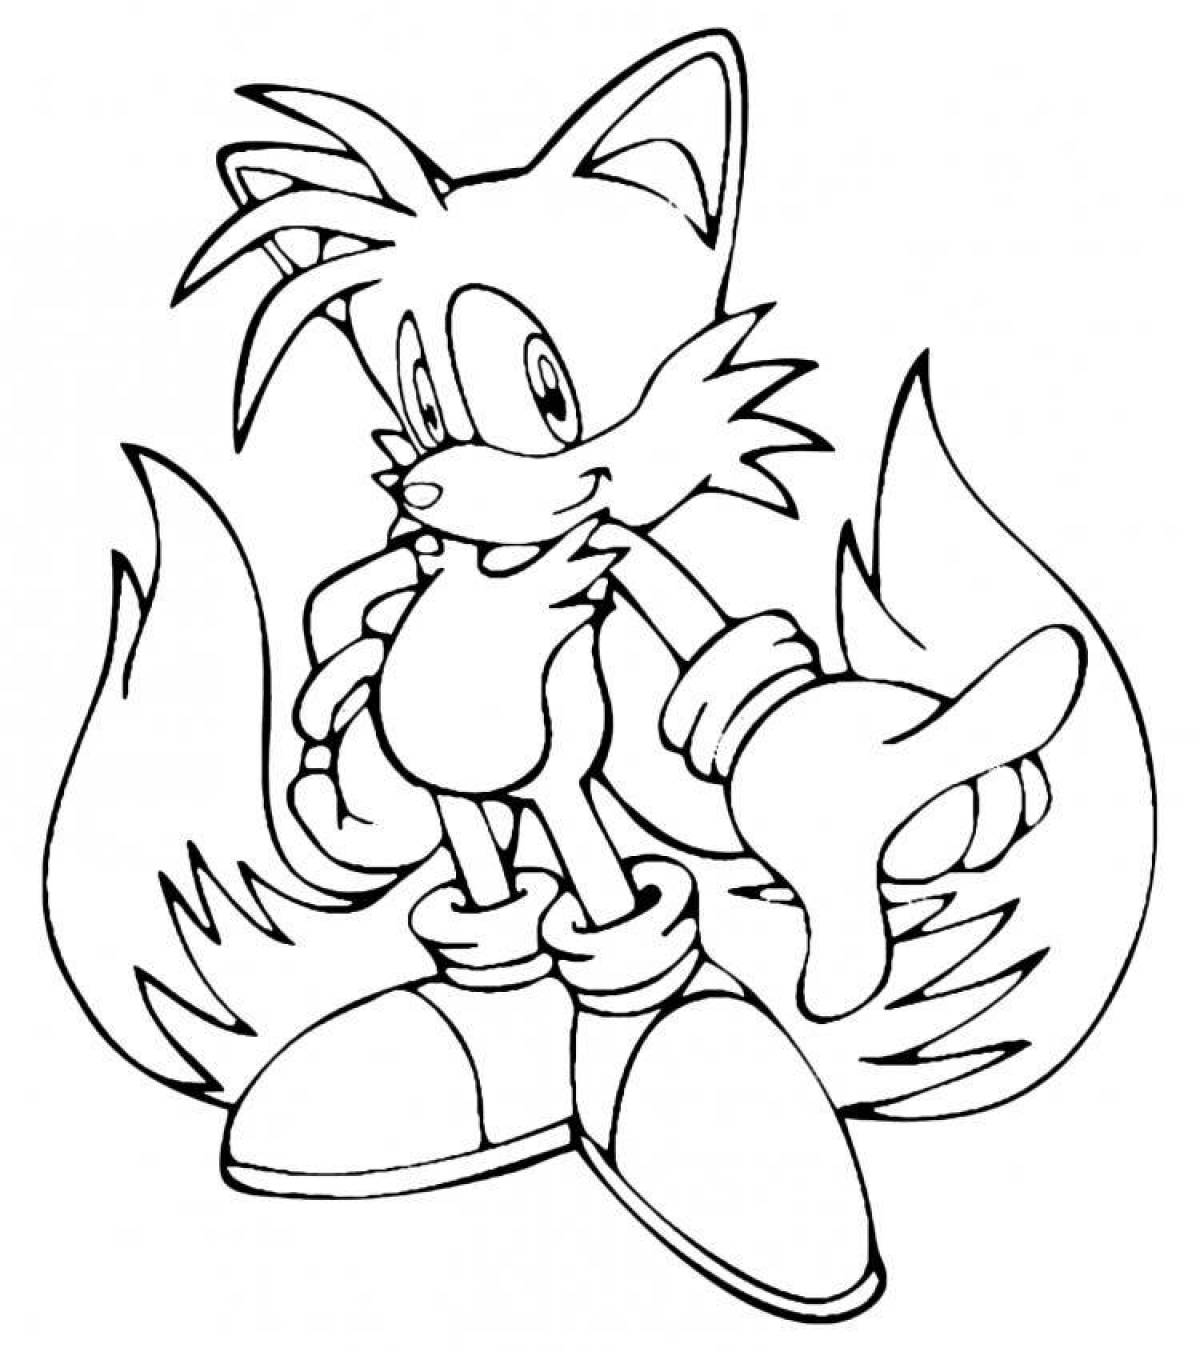 Attractive tails exe coloring